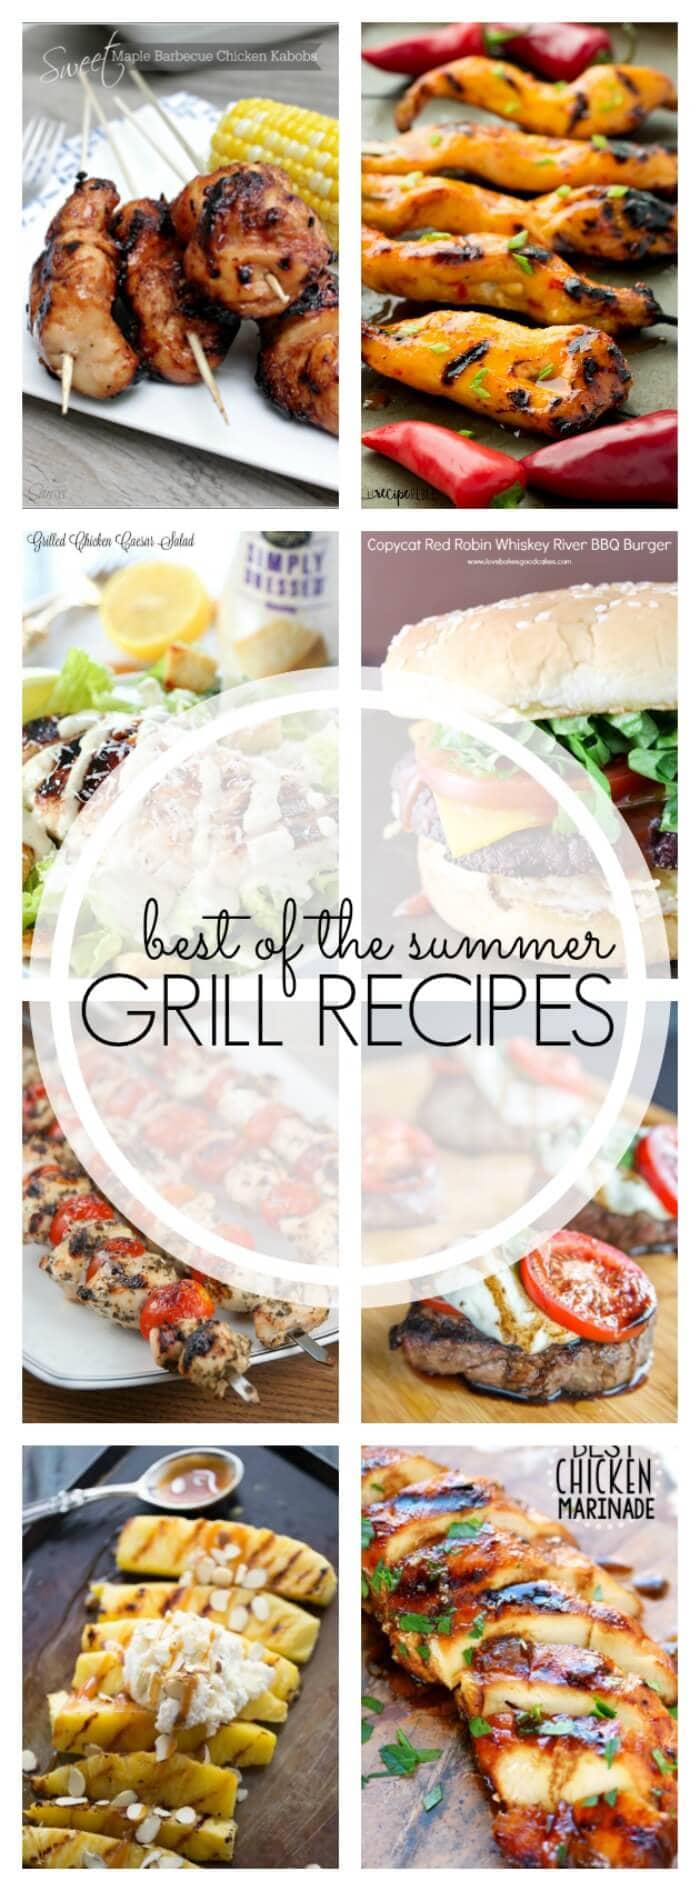 Summer Grilling Recipes - Dinners, Dishes, and Desserts